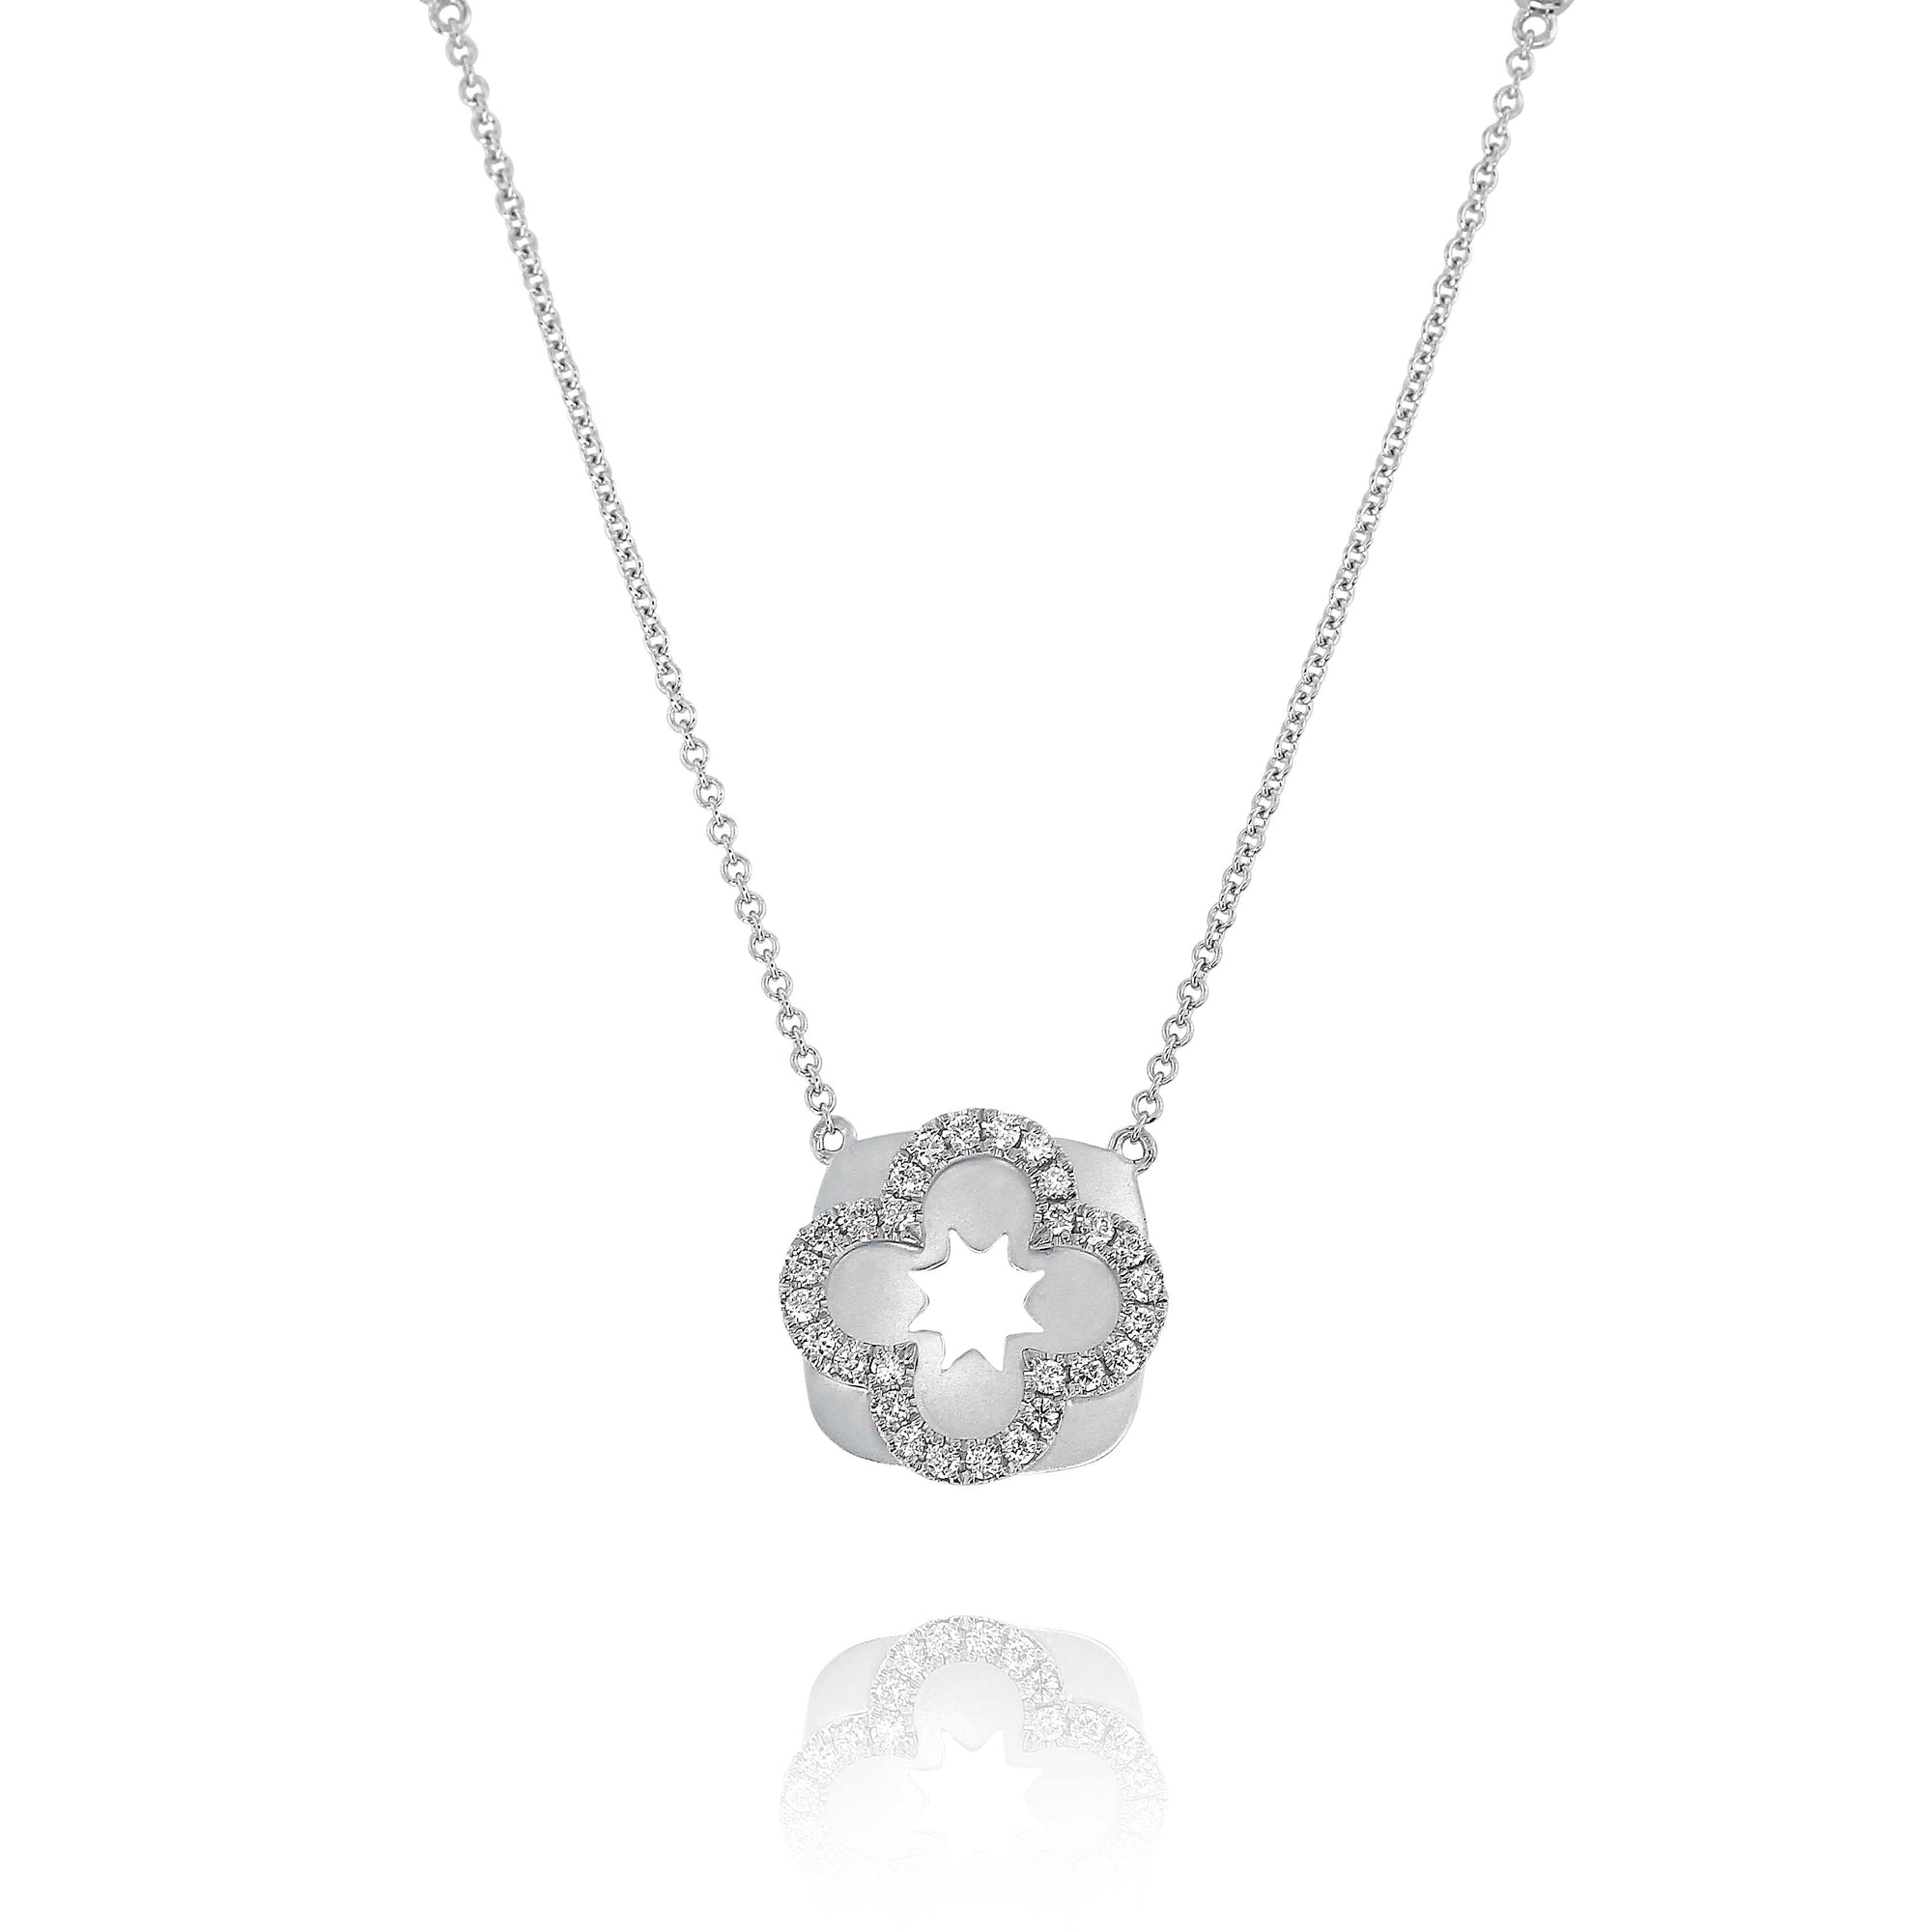 Diamond Flora Necklace by Yael - White Gold - Talisman Collection Fine Jewelers